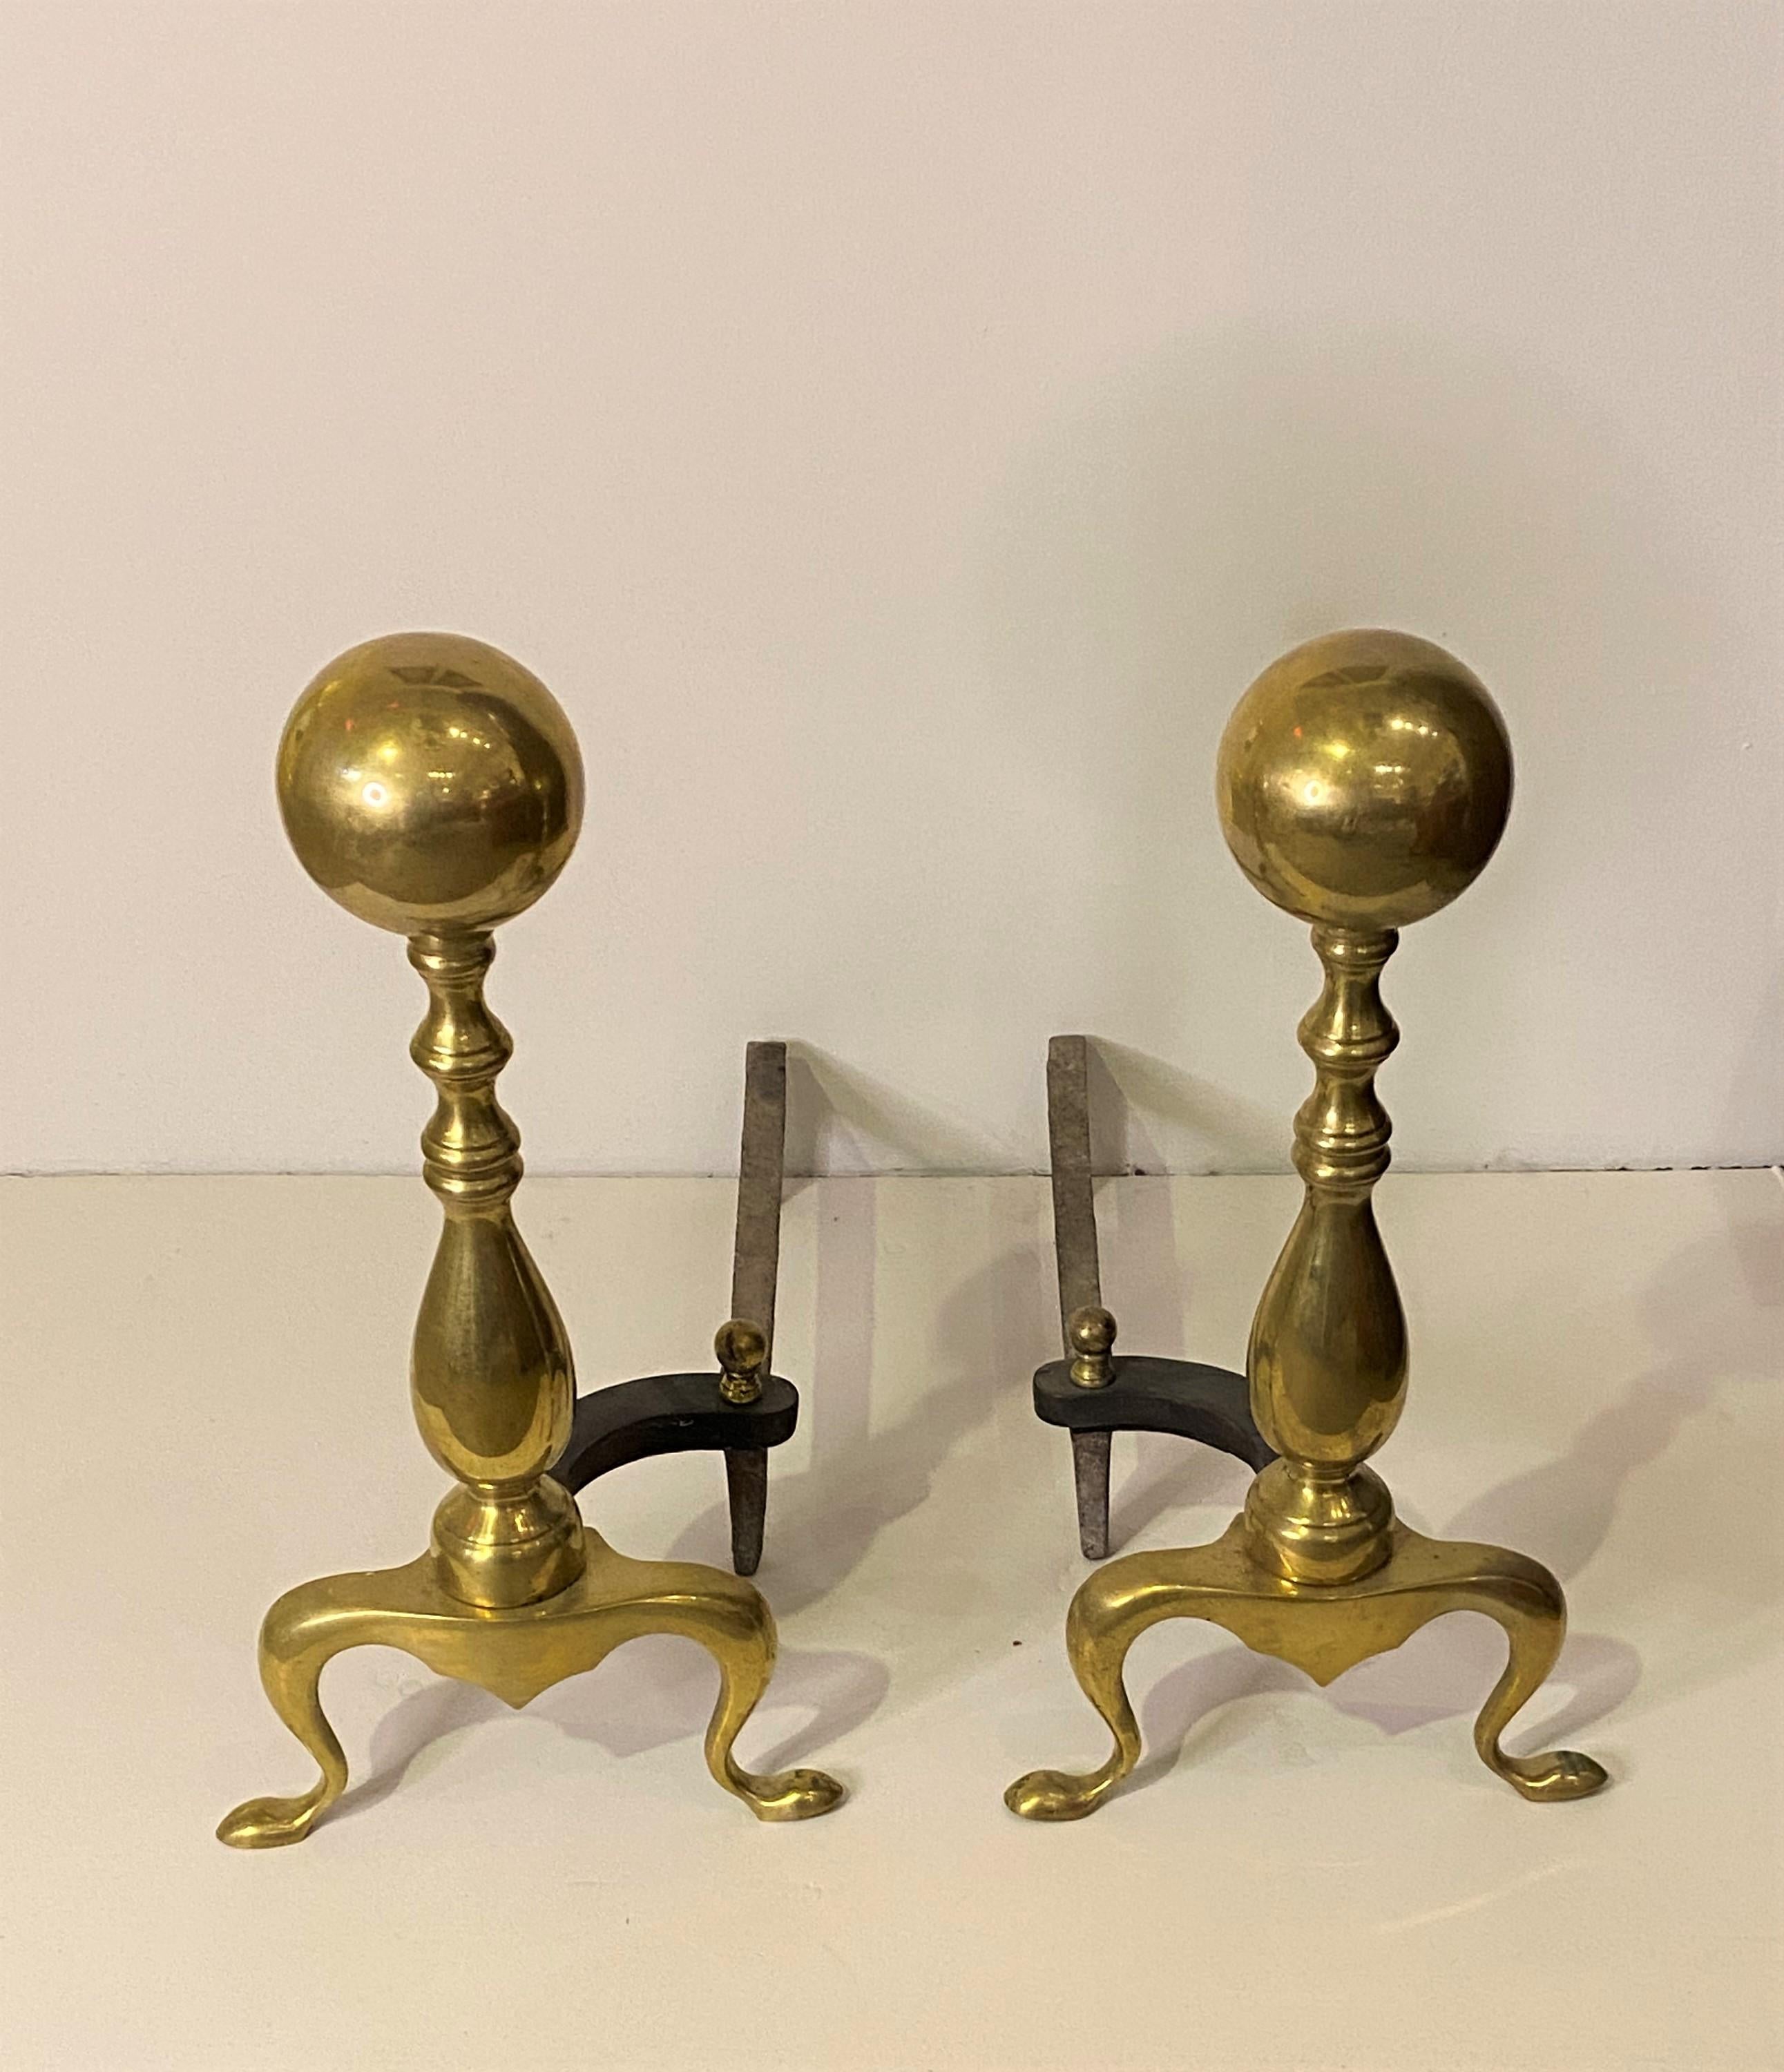 Pair of Old Solid Brass Cannon Ball Andirons. 